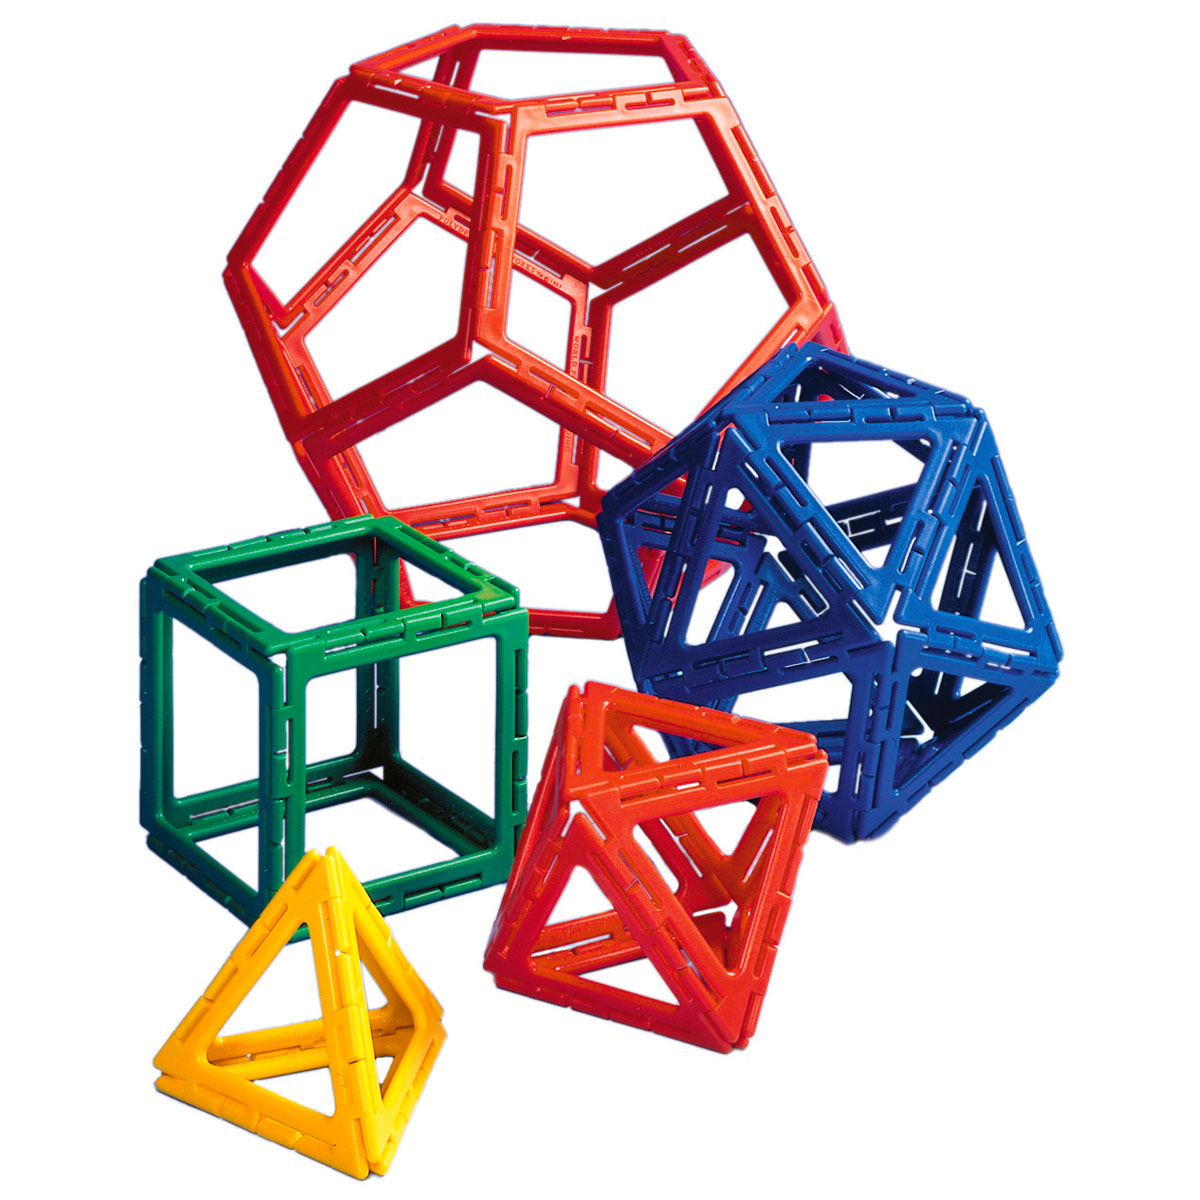 mostly new in package, 2 used shapes Polydron Frameworks